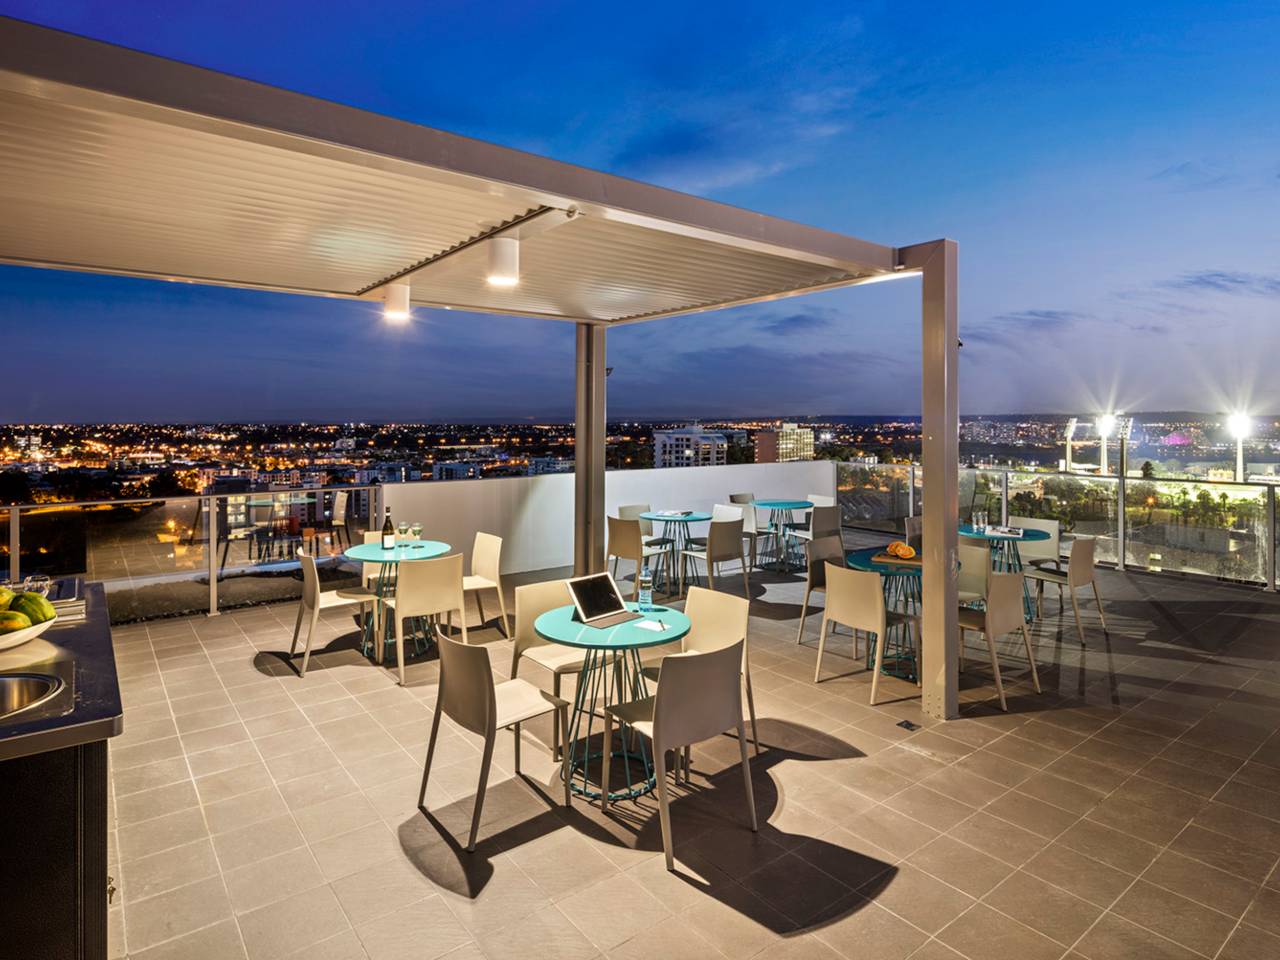 Rooftop Venue Overlooking Perth City Set Up With Tables And Chairs At Night.